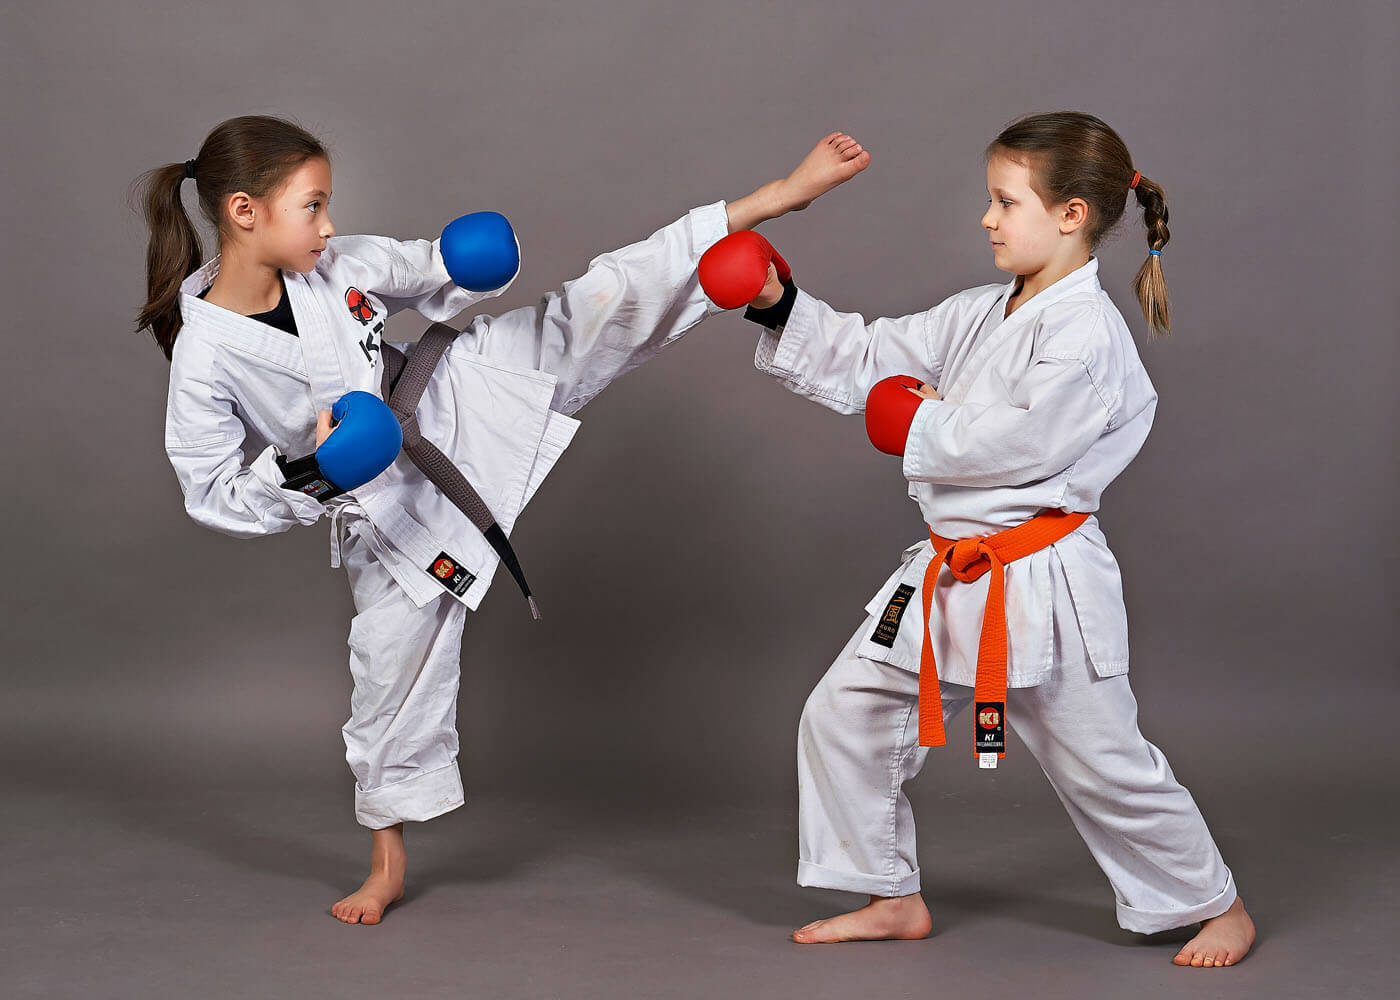 Best Of Karate Training Lessons Karate Training Tips And Exercises In The Nature Workout Stretching